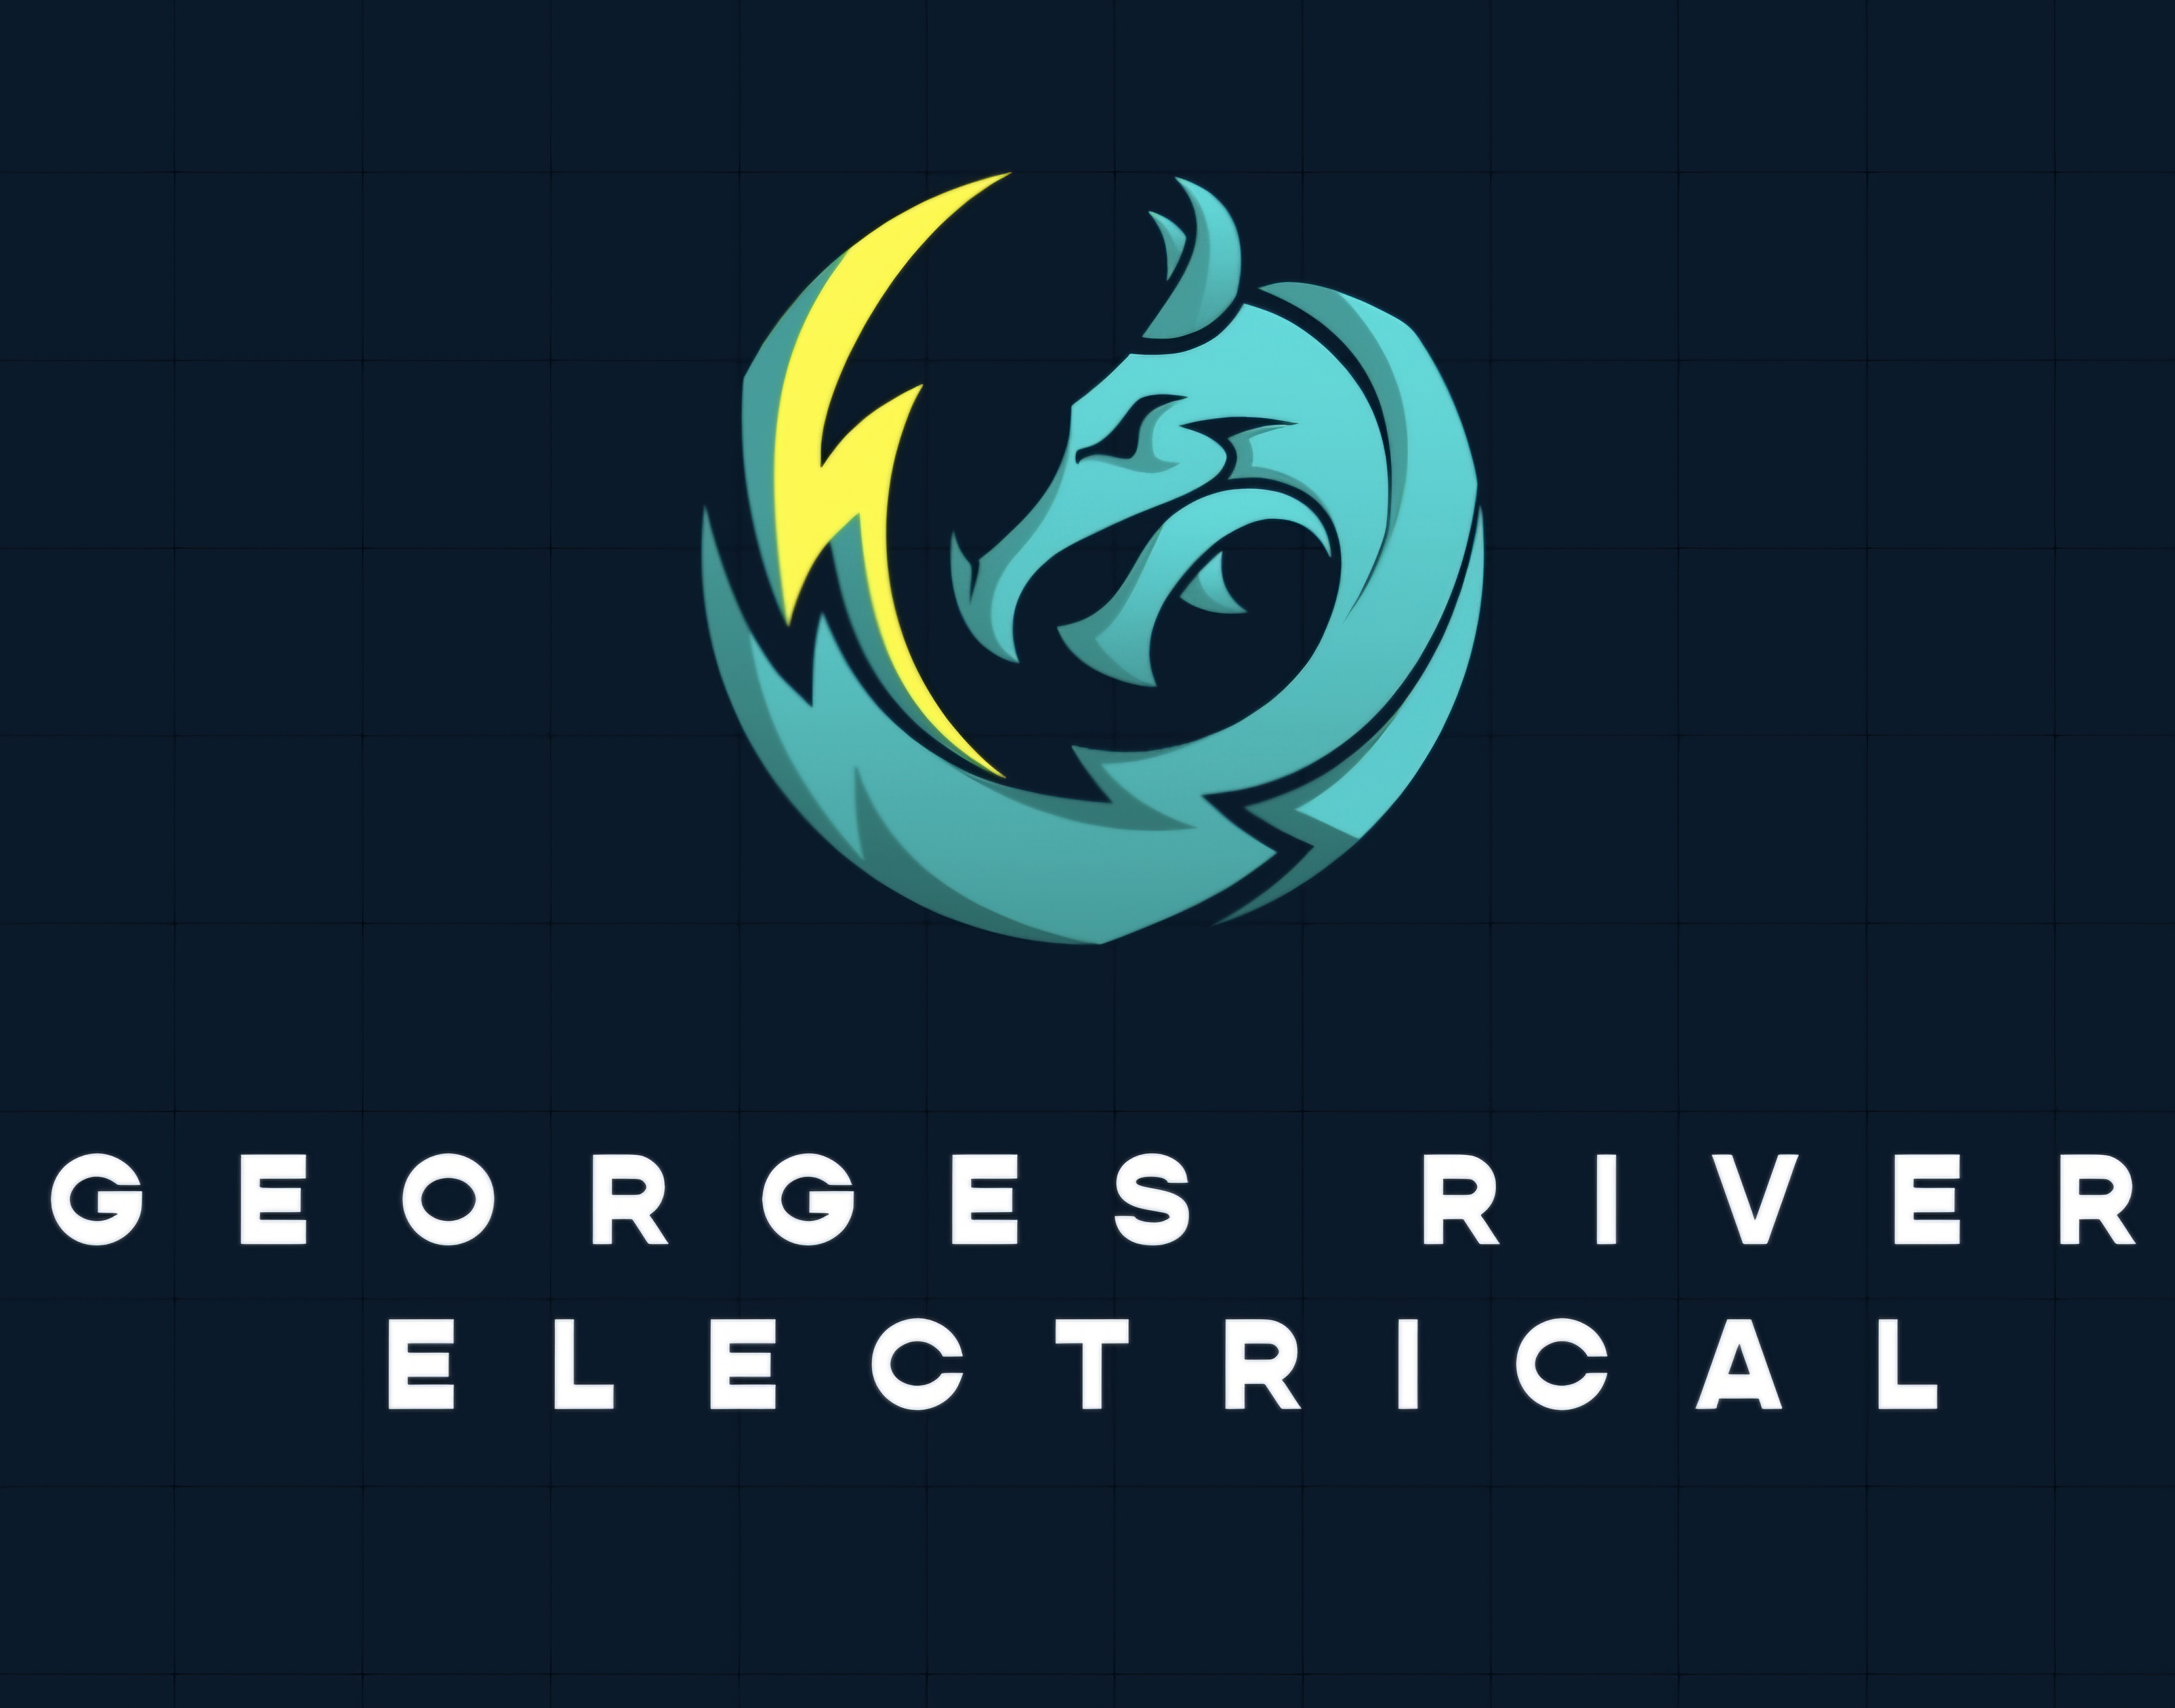 Georges River Electrical.